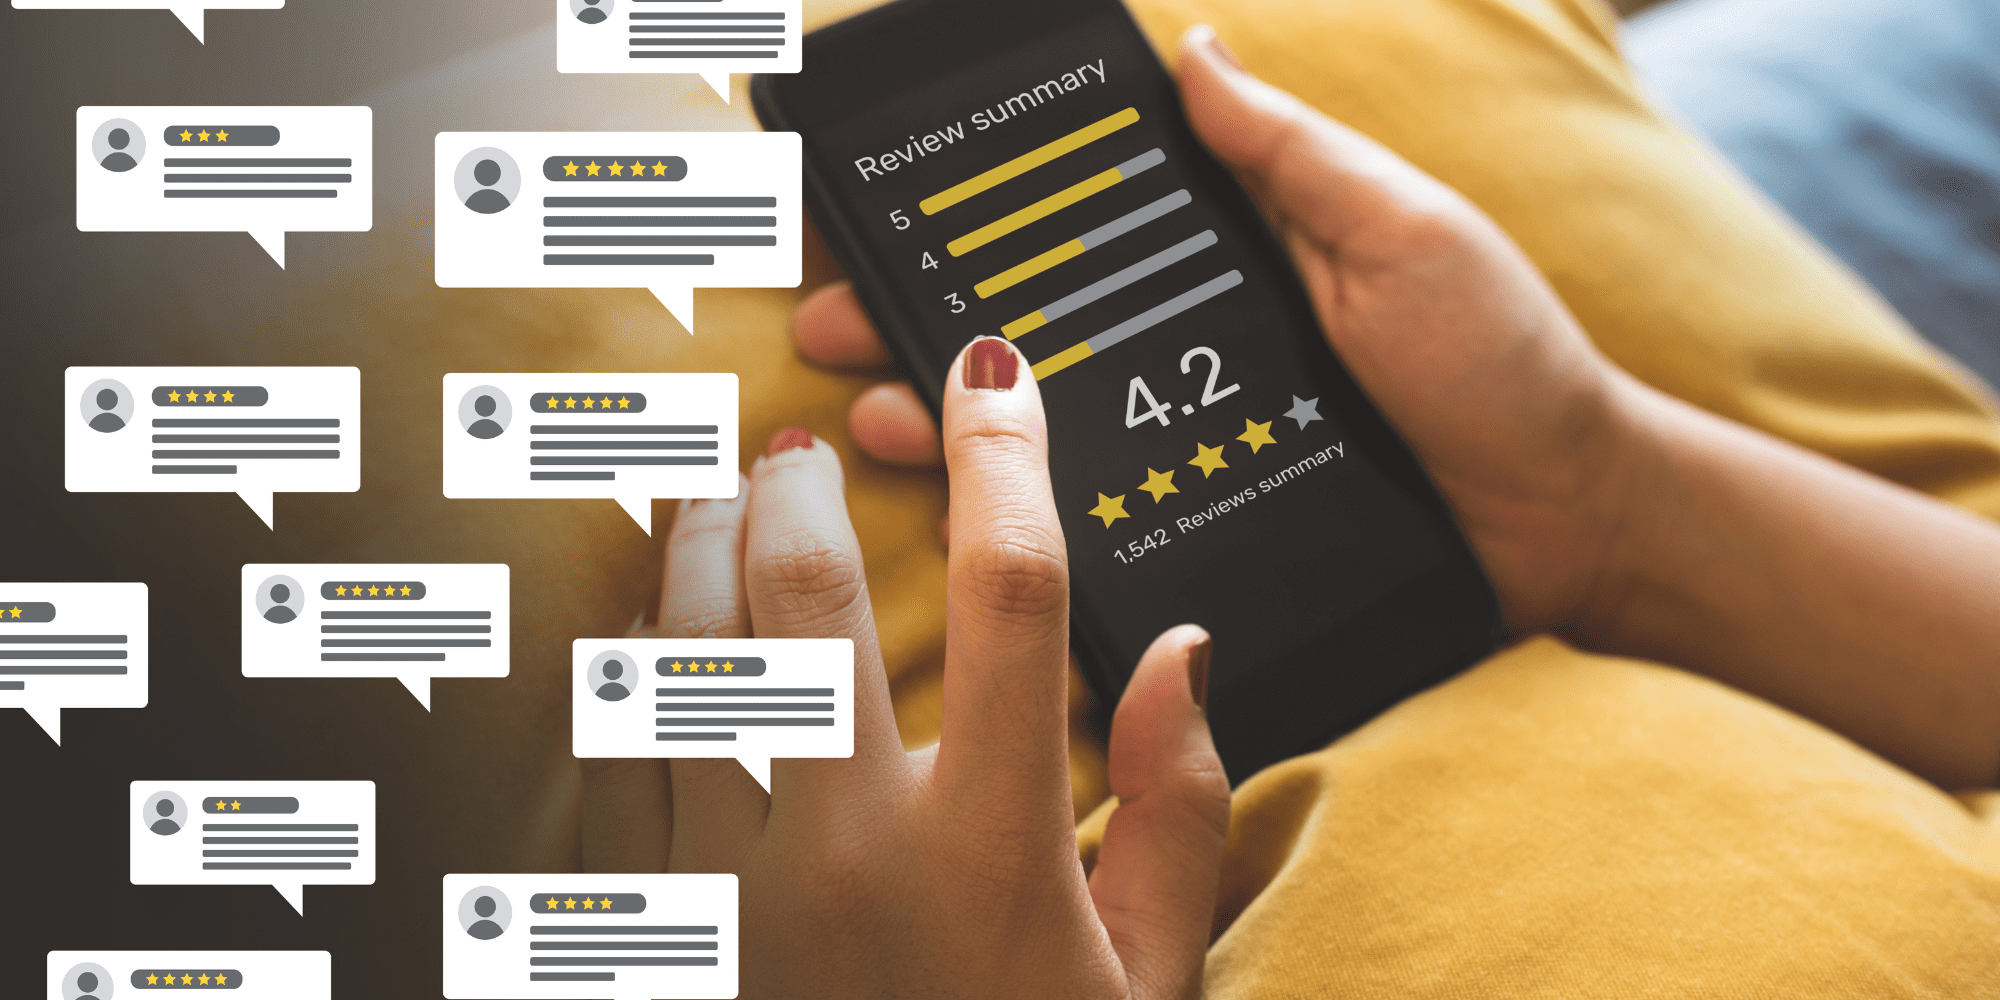 Client Reviews and Ratings